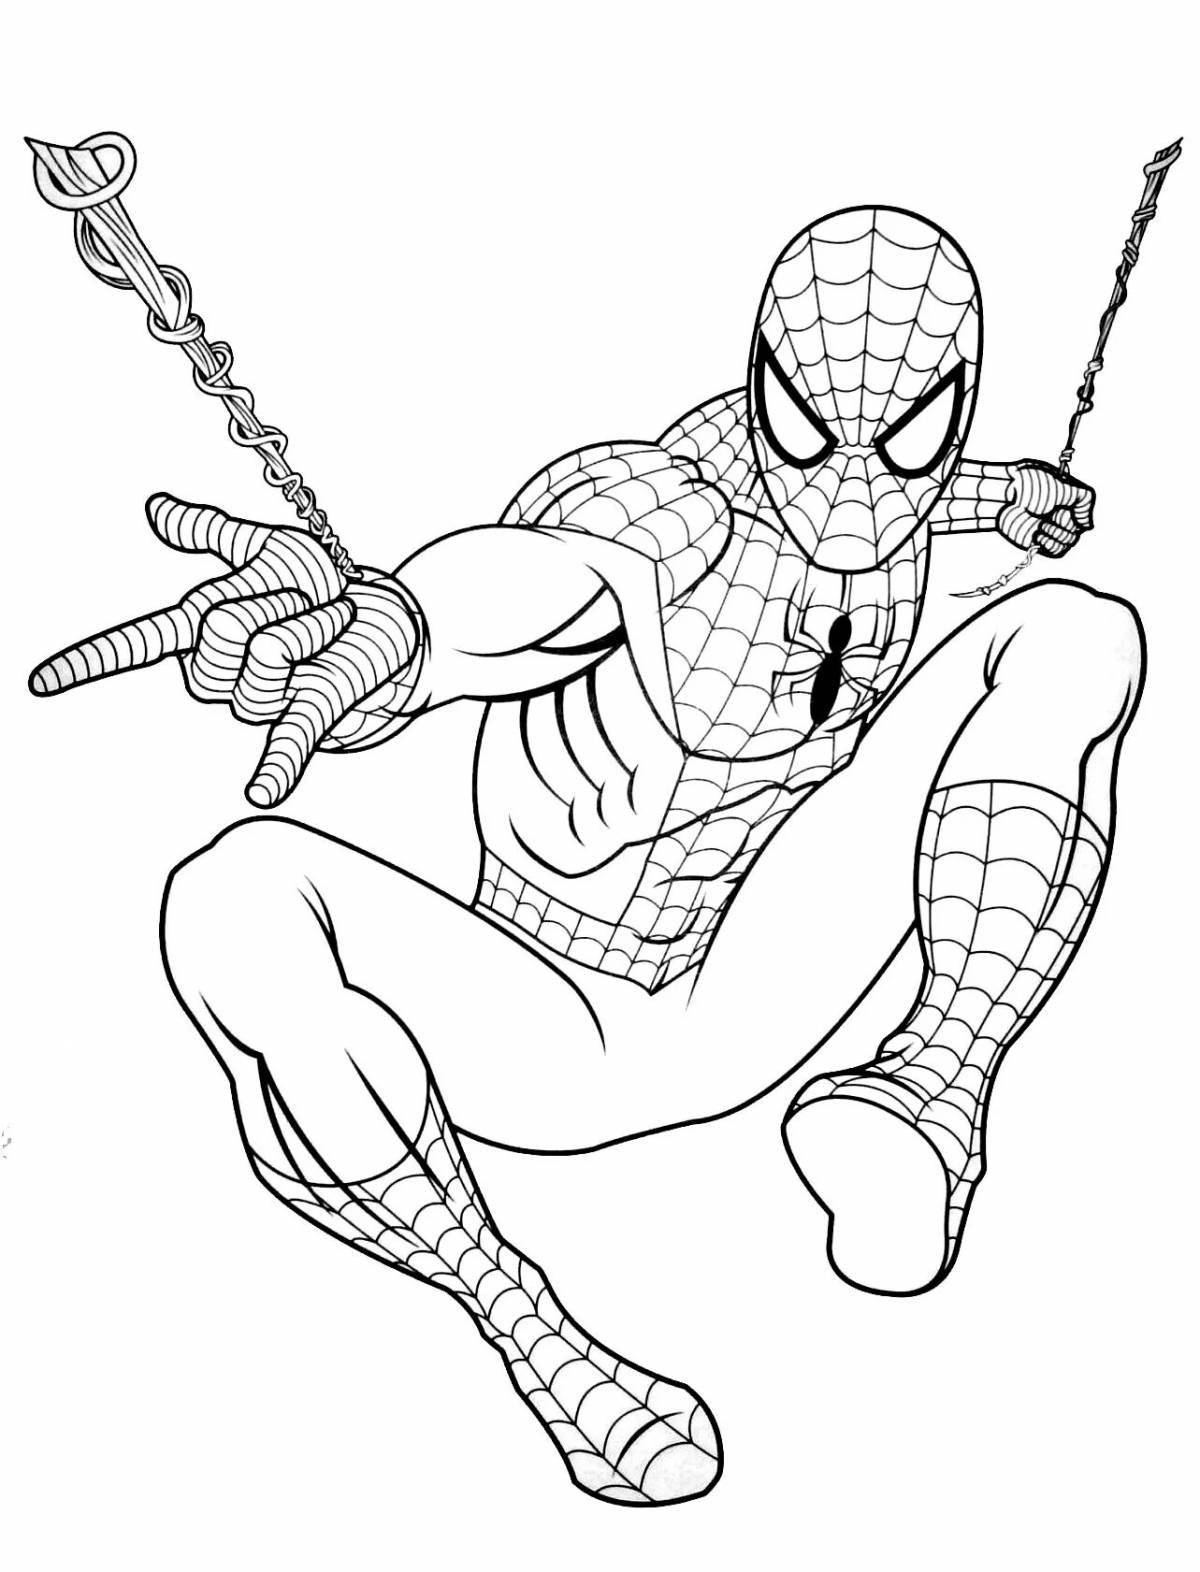 Colorful spiderman team coloring page